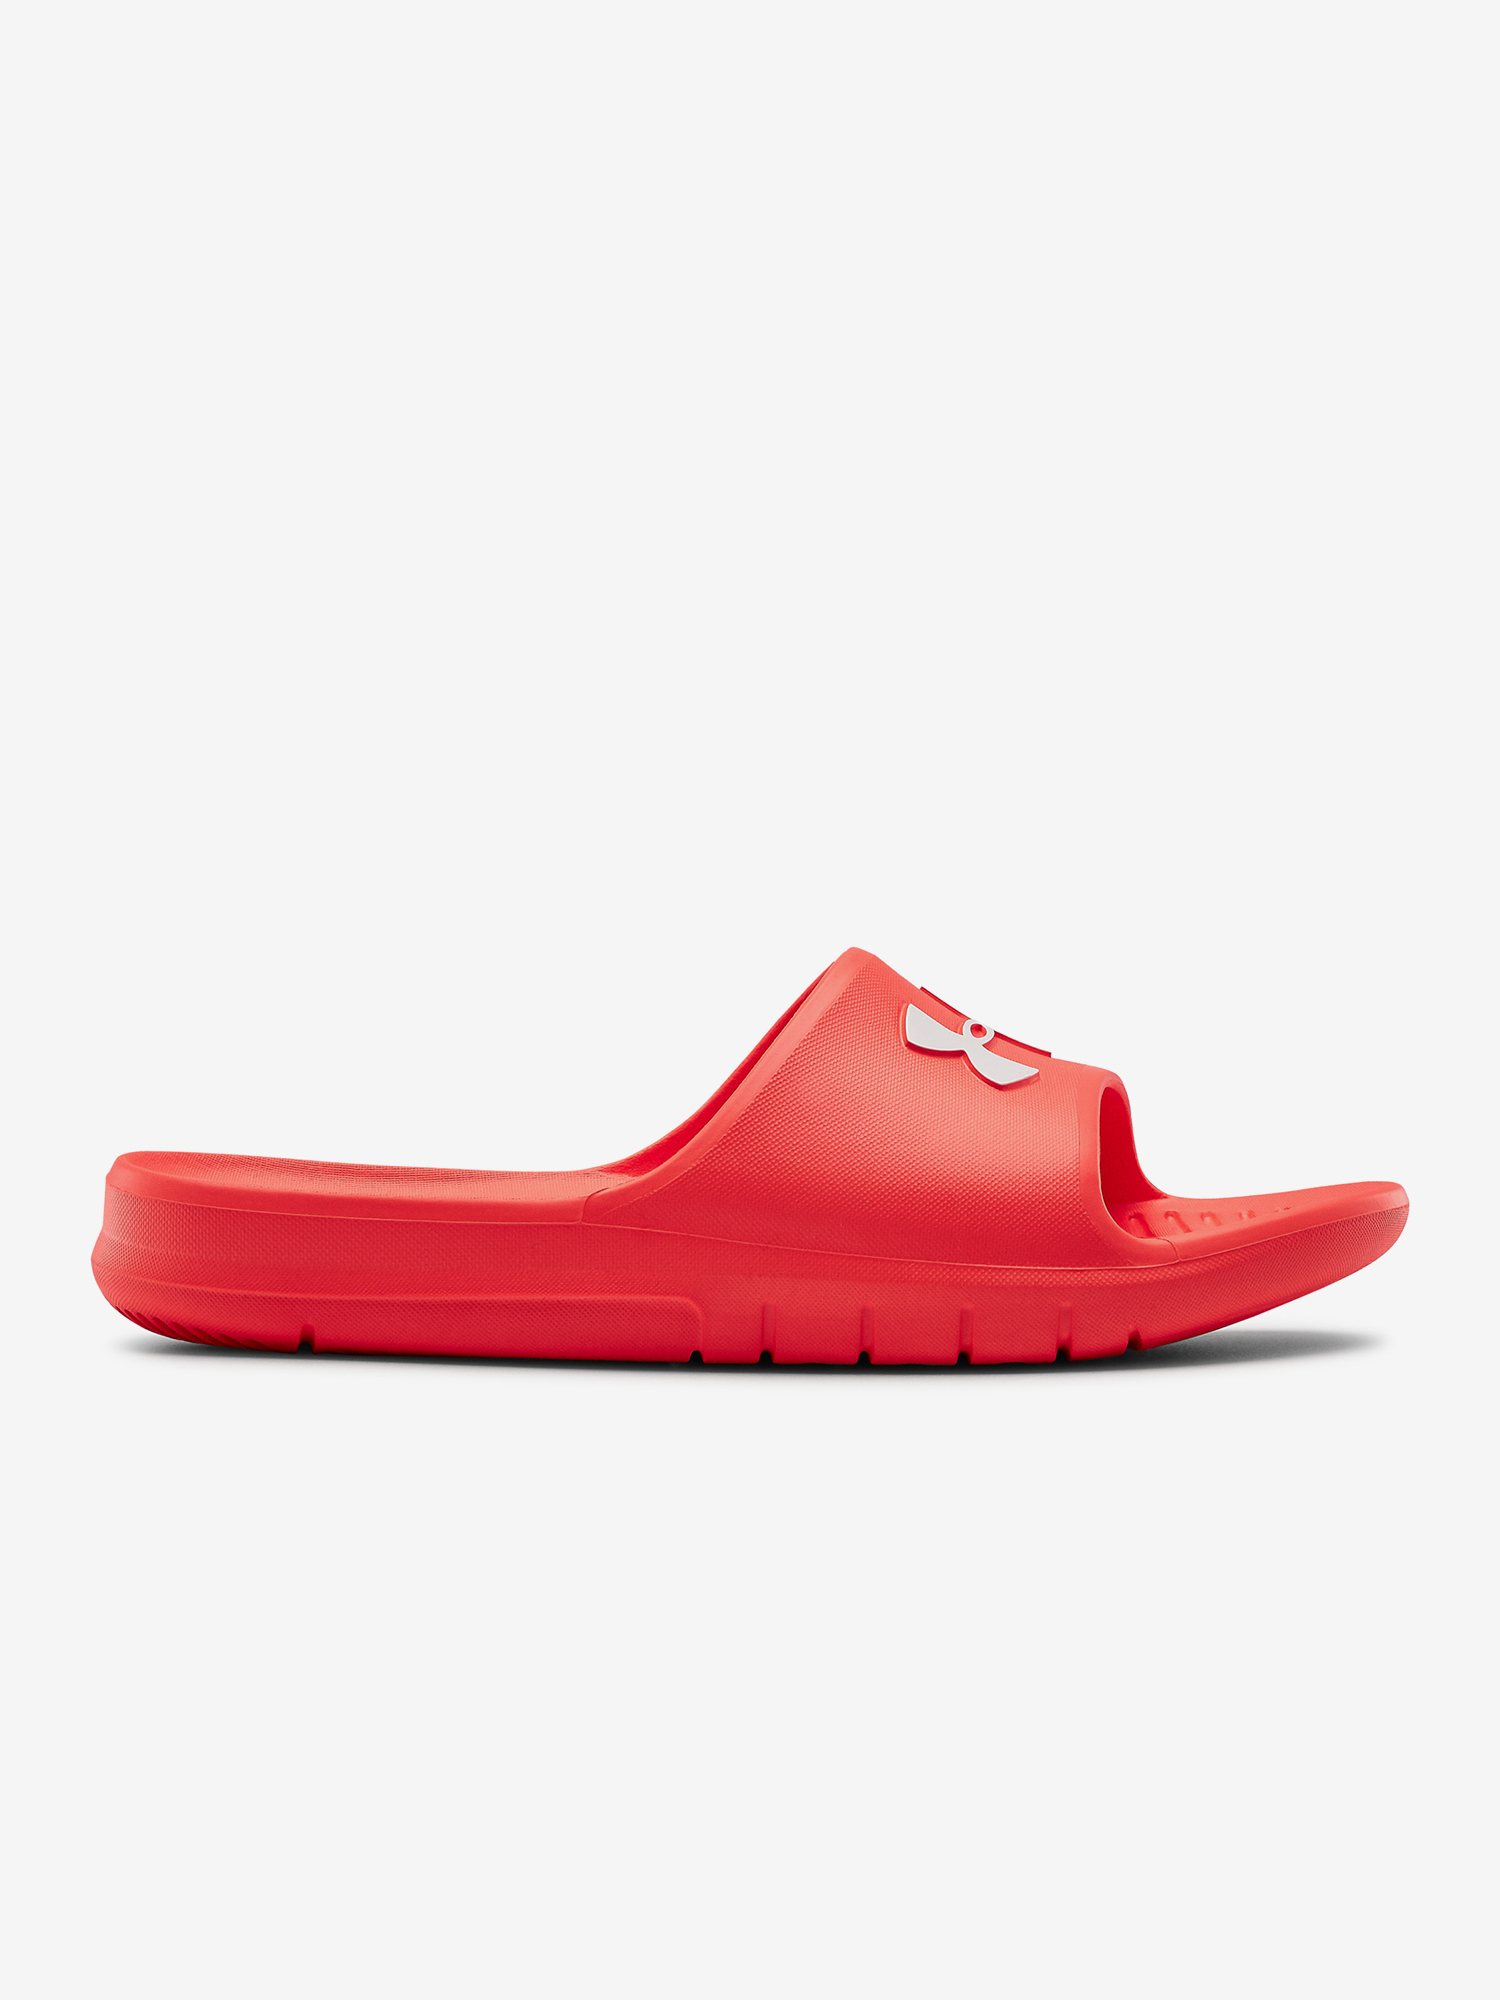 Core Under Armour Red Men's Slippers